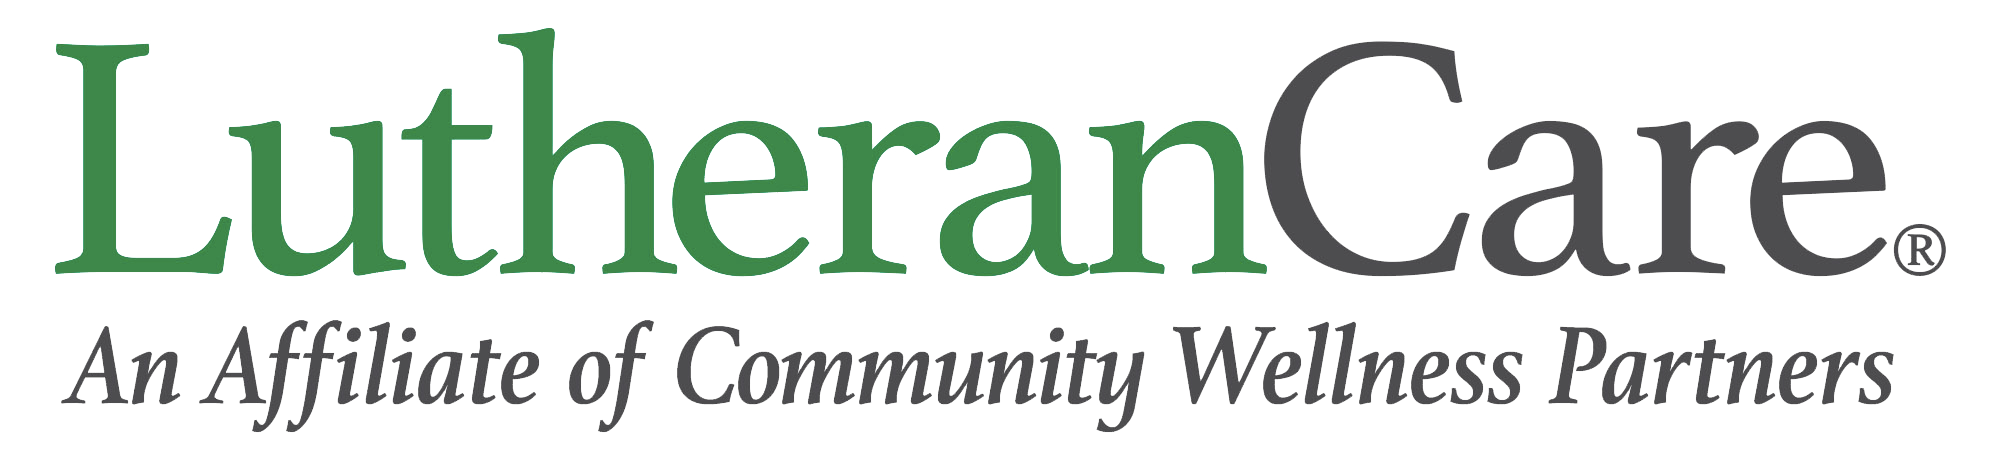 Lutheran Care, An Affiliate of Community Wellness Partners